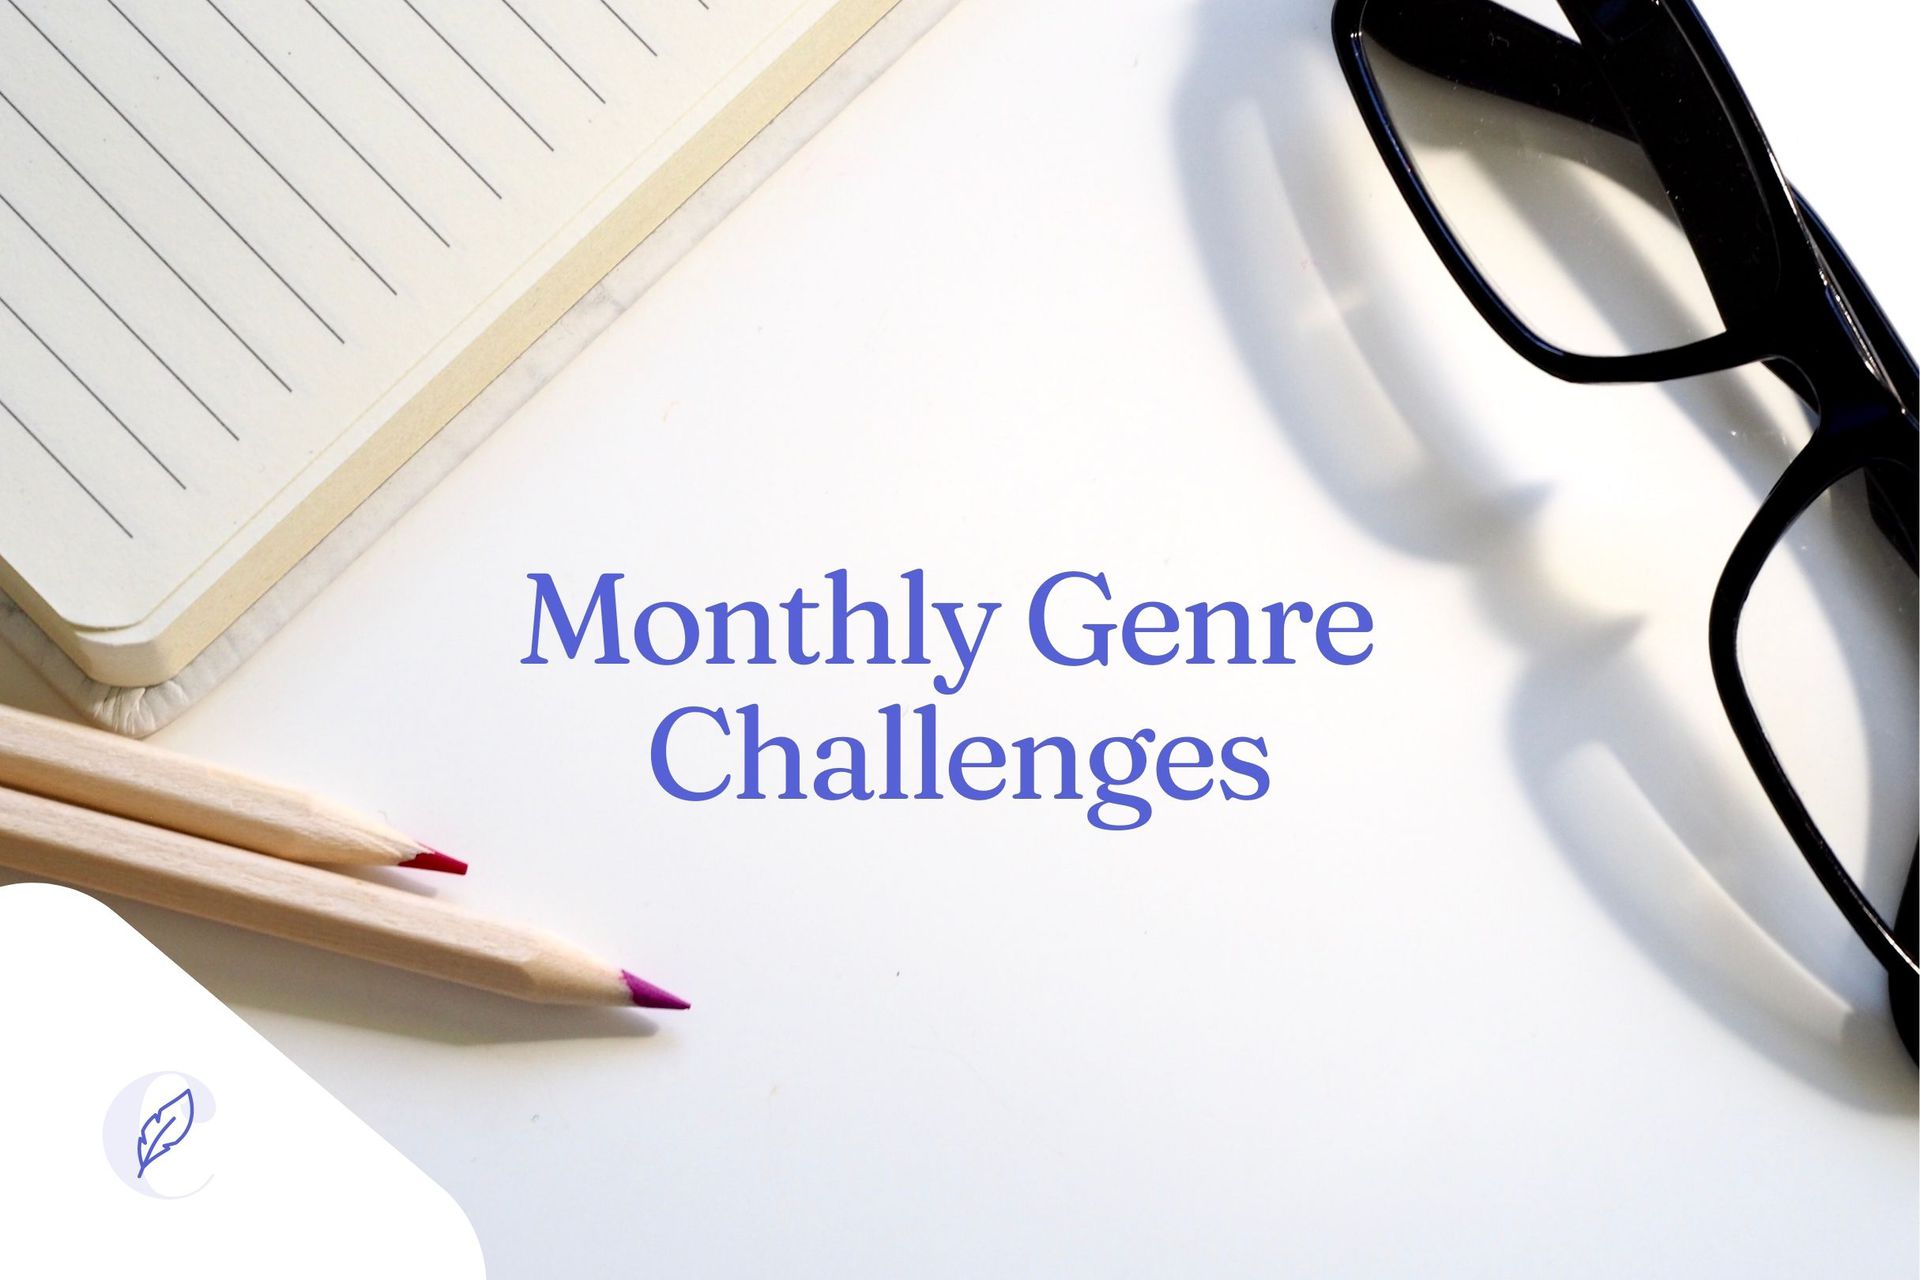 Announcing: our Monthly Genre Challenges for Catholic fiction